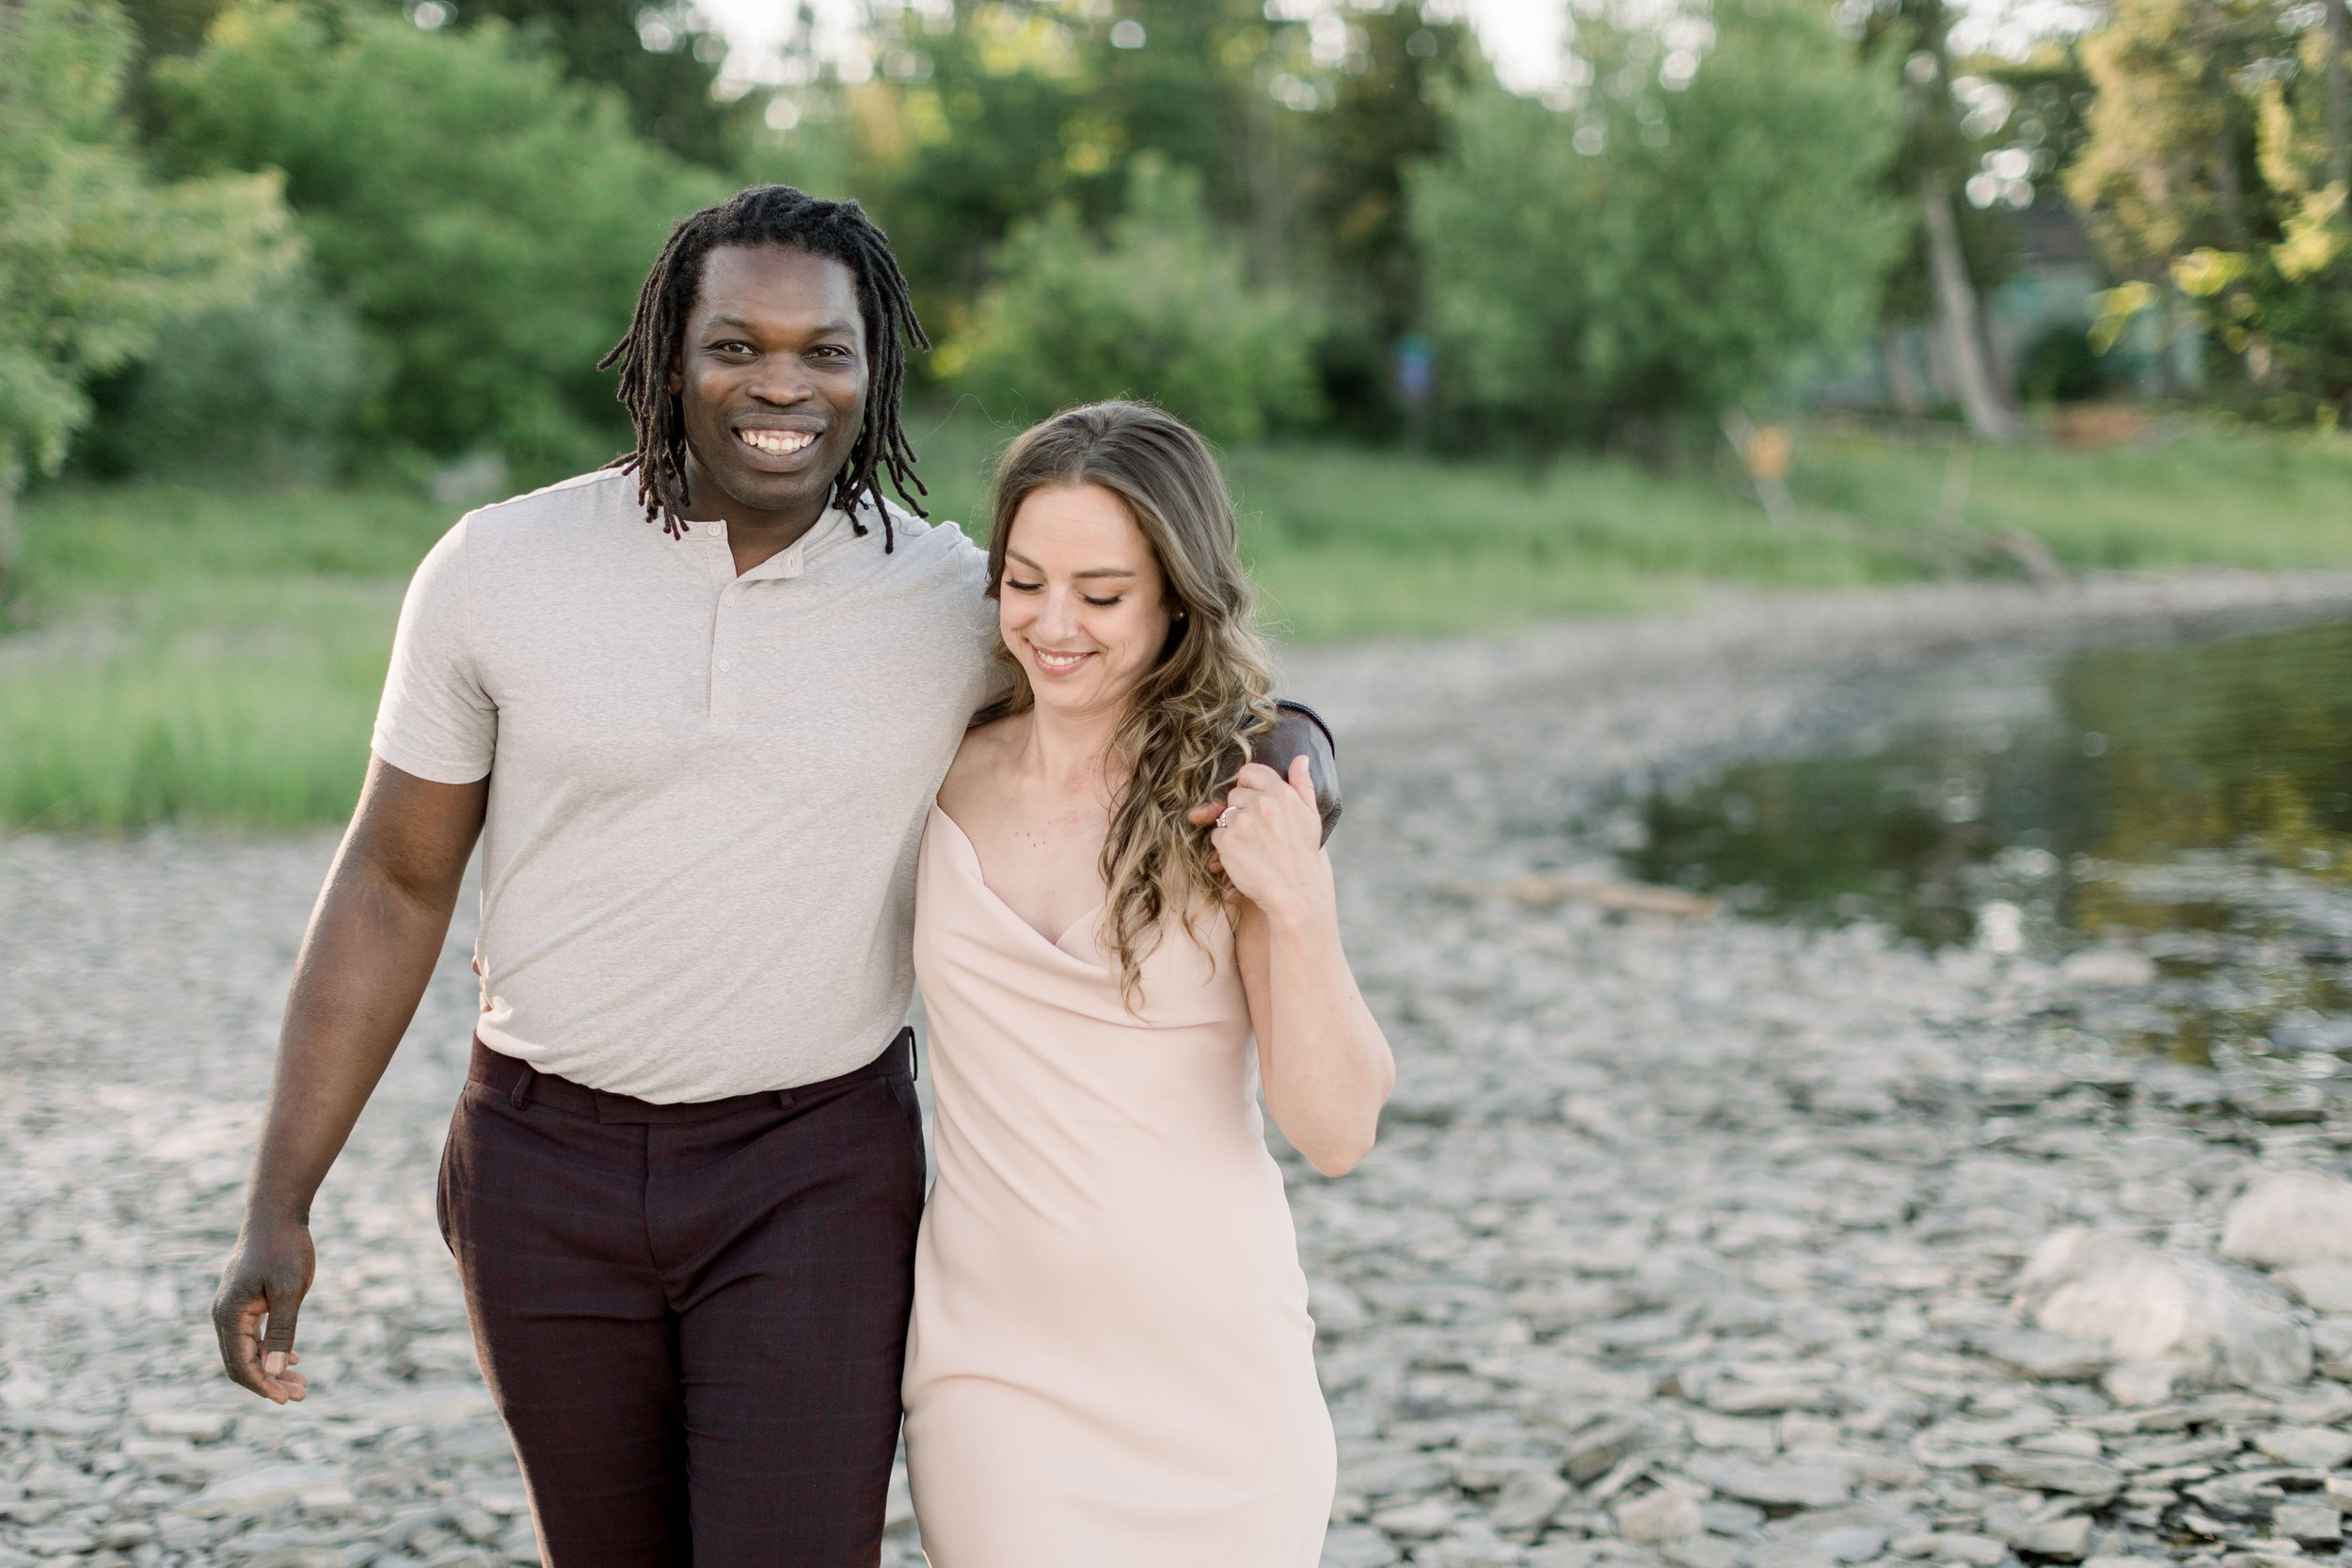  A portrait of an engaged couple where a man is smiling and looking forward was captured by Chelsea Mason Photography. man smiles #Chelseamasonphotography #Chelseamasonengagements #Onatarioengagements #Pinhey'sPoint #Ontarioweddingphotographers 